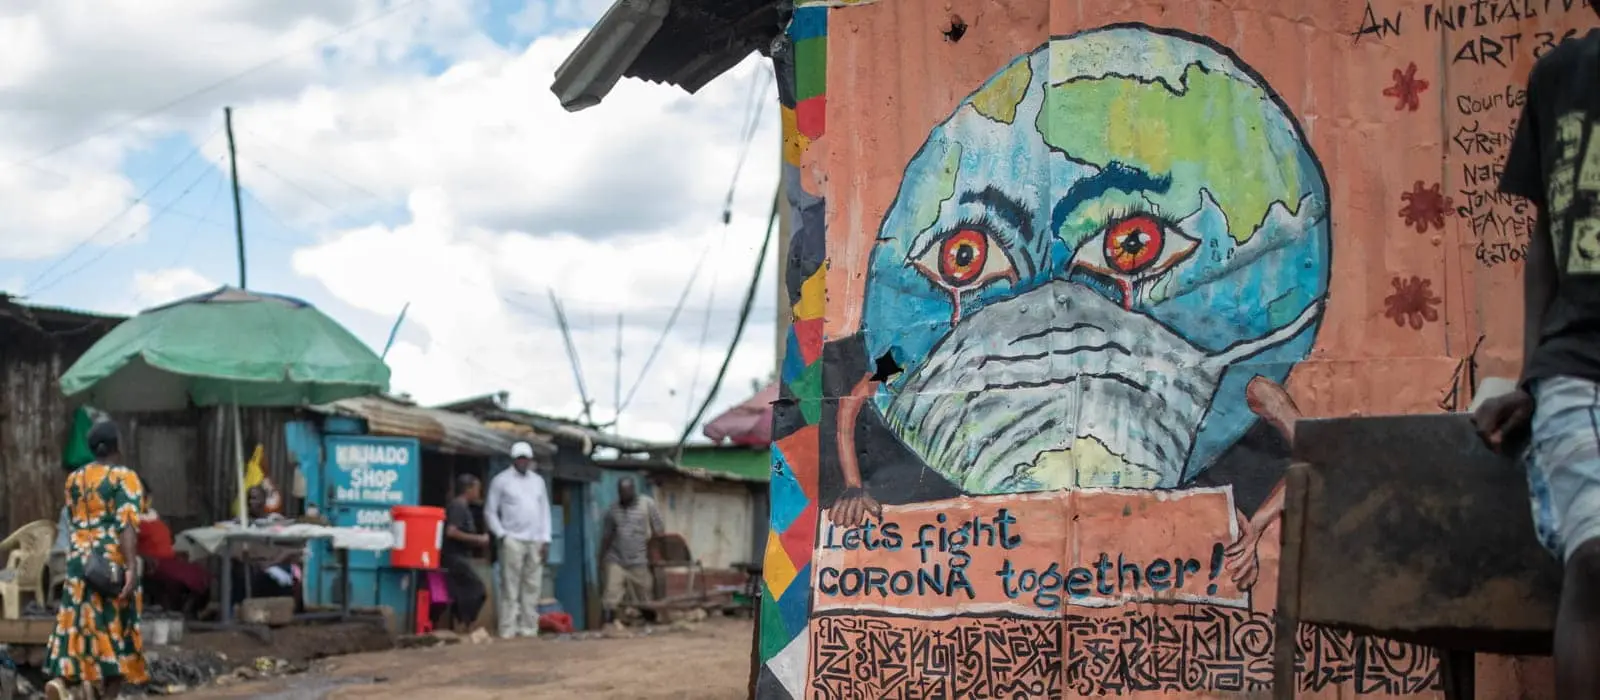 General View of the centre of Kibera slum area in Nairobi including art from Art 360 artist collective.